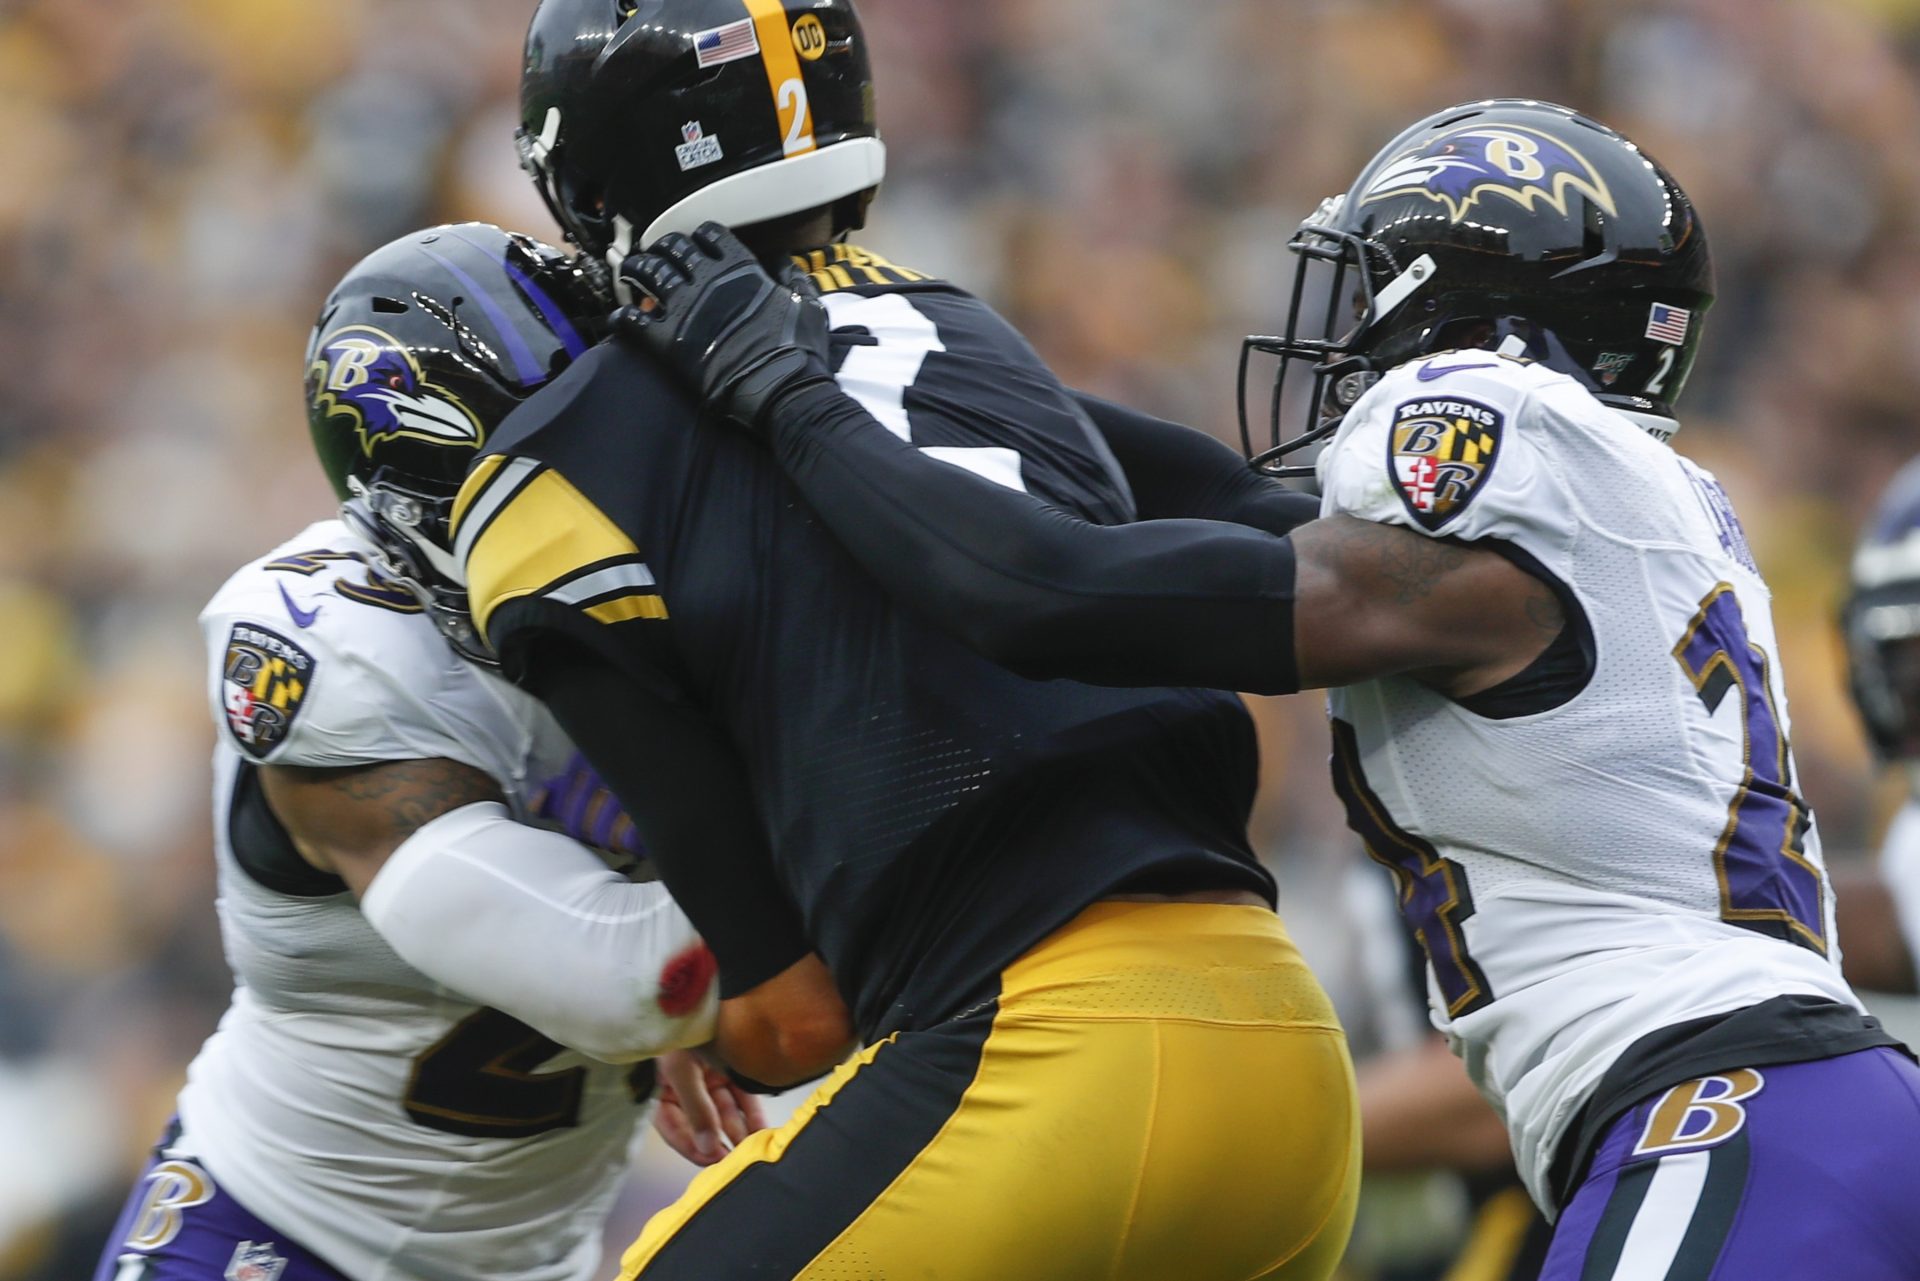 Pittsburgh Steelers quarterback Mason Rudolph (2) is hit by Baltimore Ravens free safety Earl Thomas (29), left, and cornerback Brandon Carr (24) during the second half of an NFL football game, Sunday, Oct. 6, 2019, in Pittsburgh.